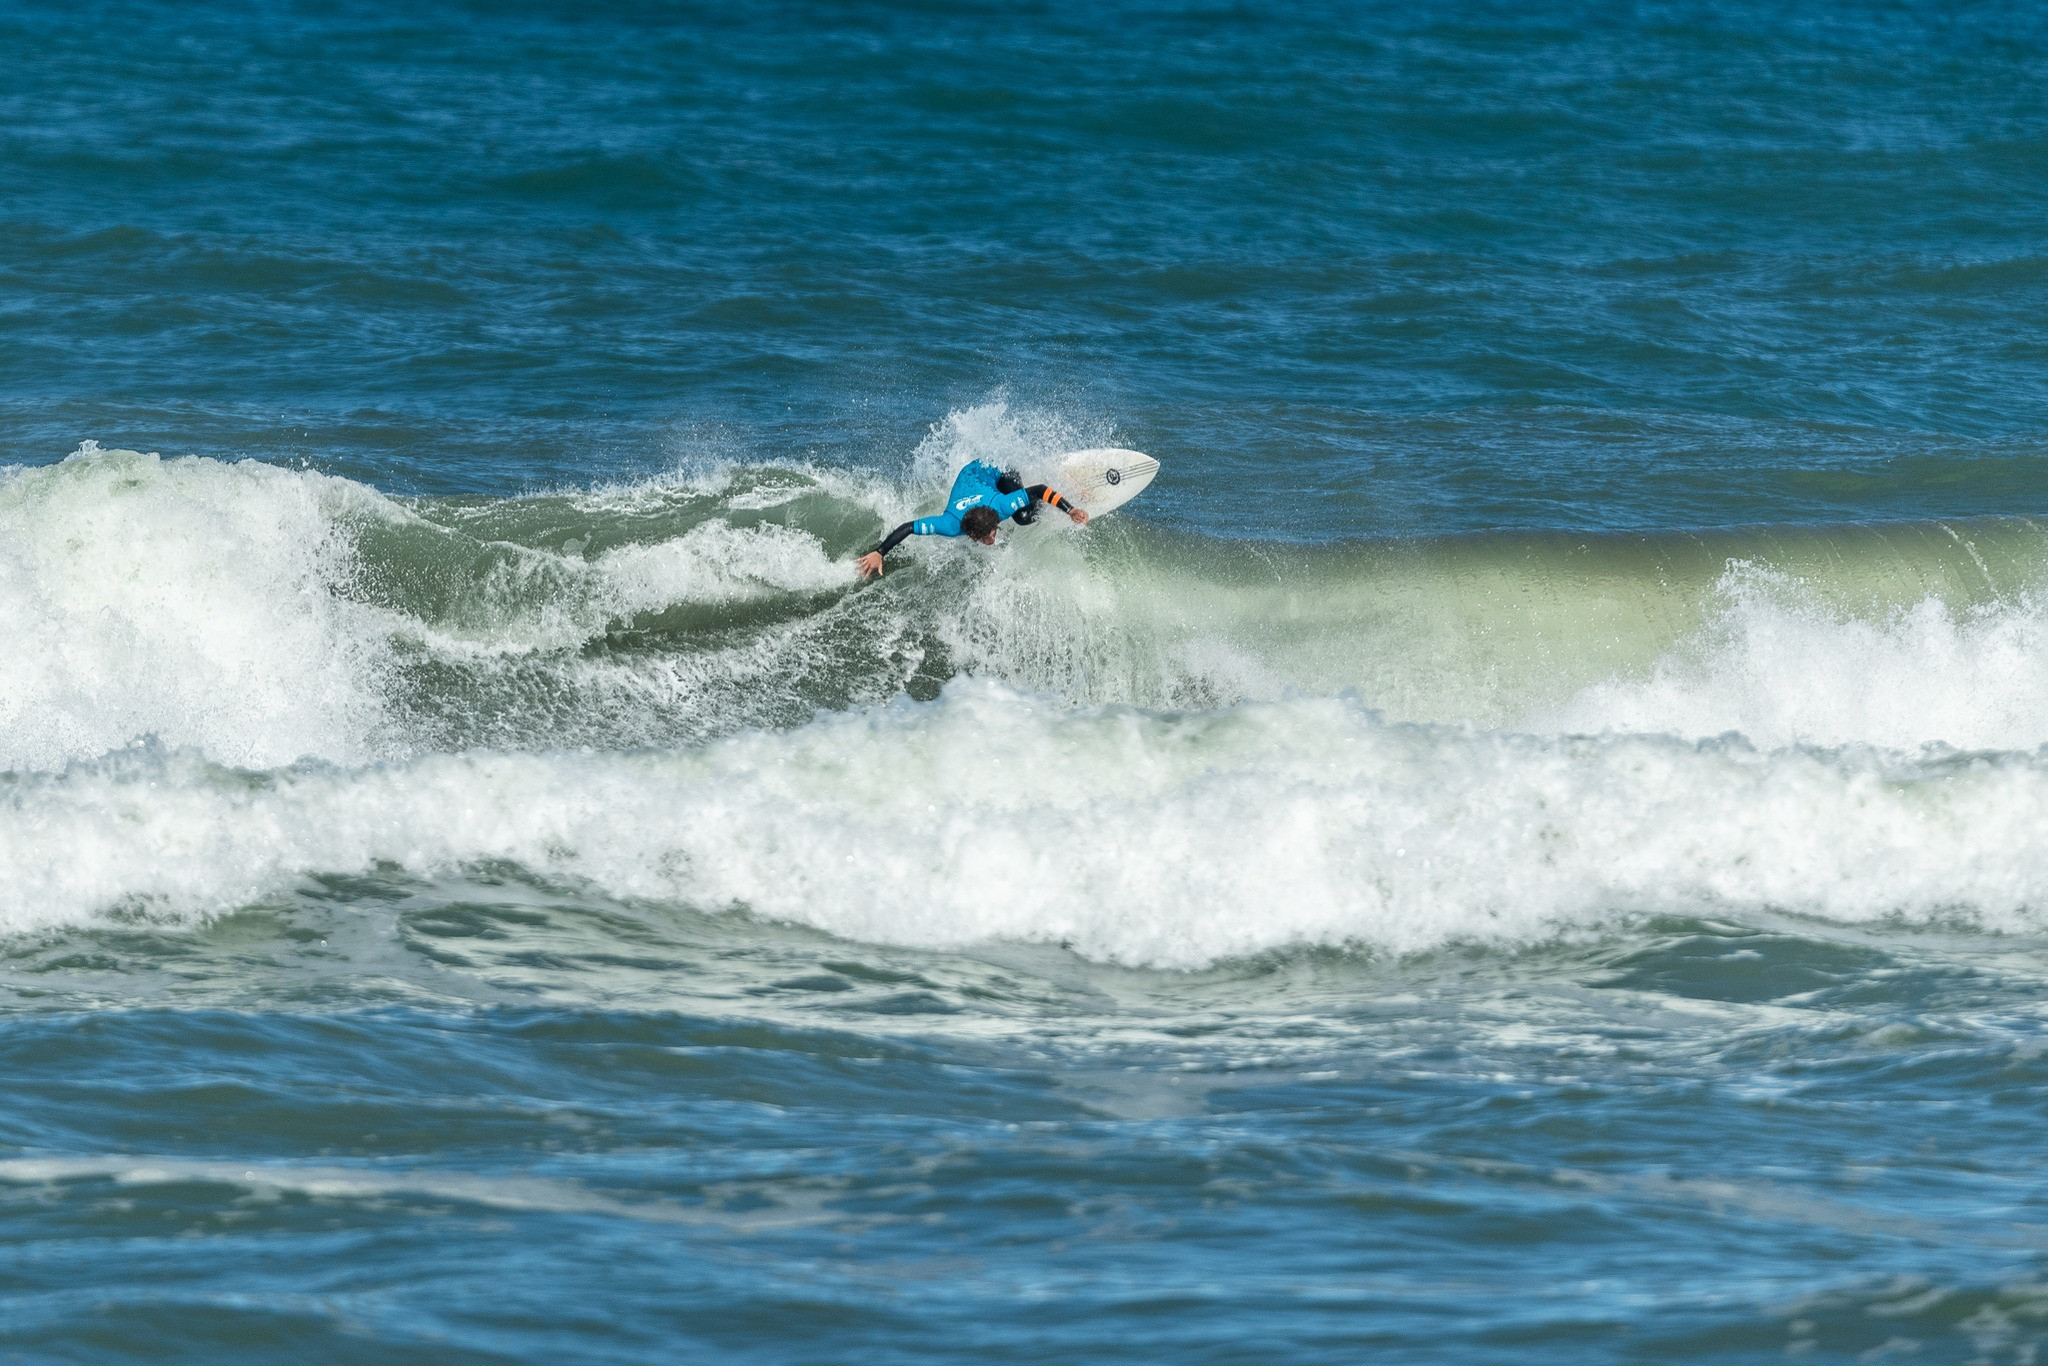 Rosmini competes at NZ Schools Surfing Festival